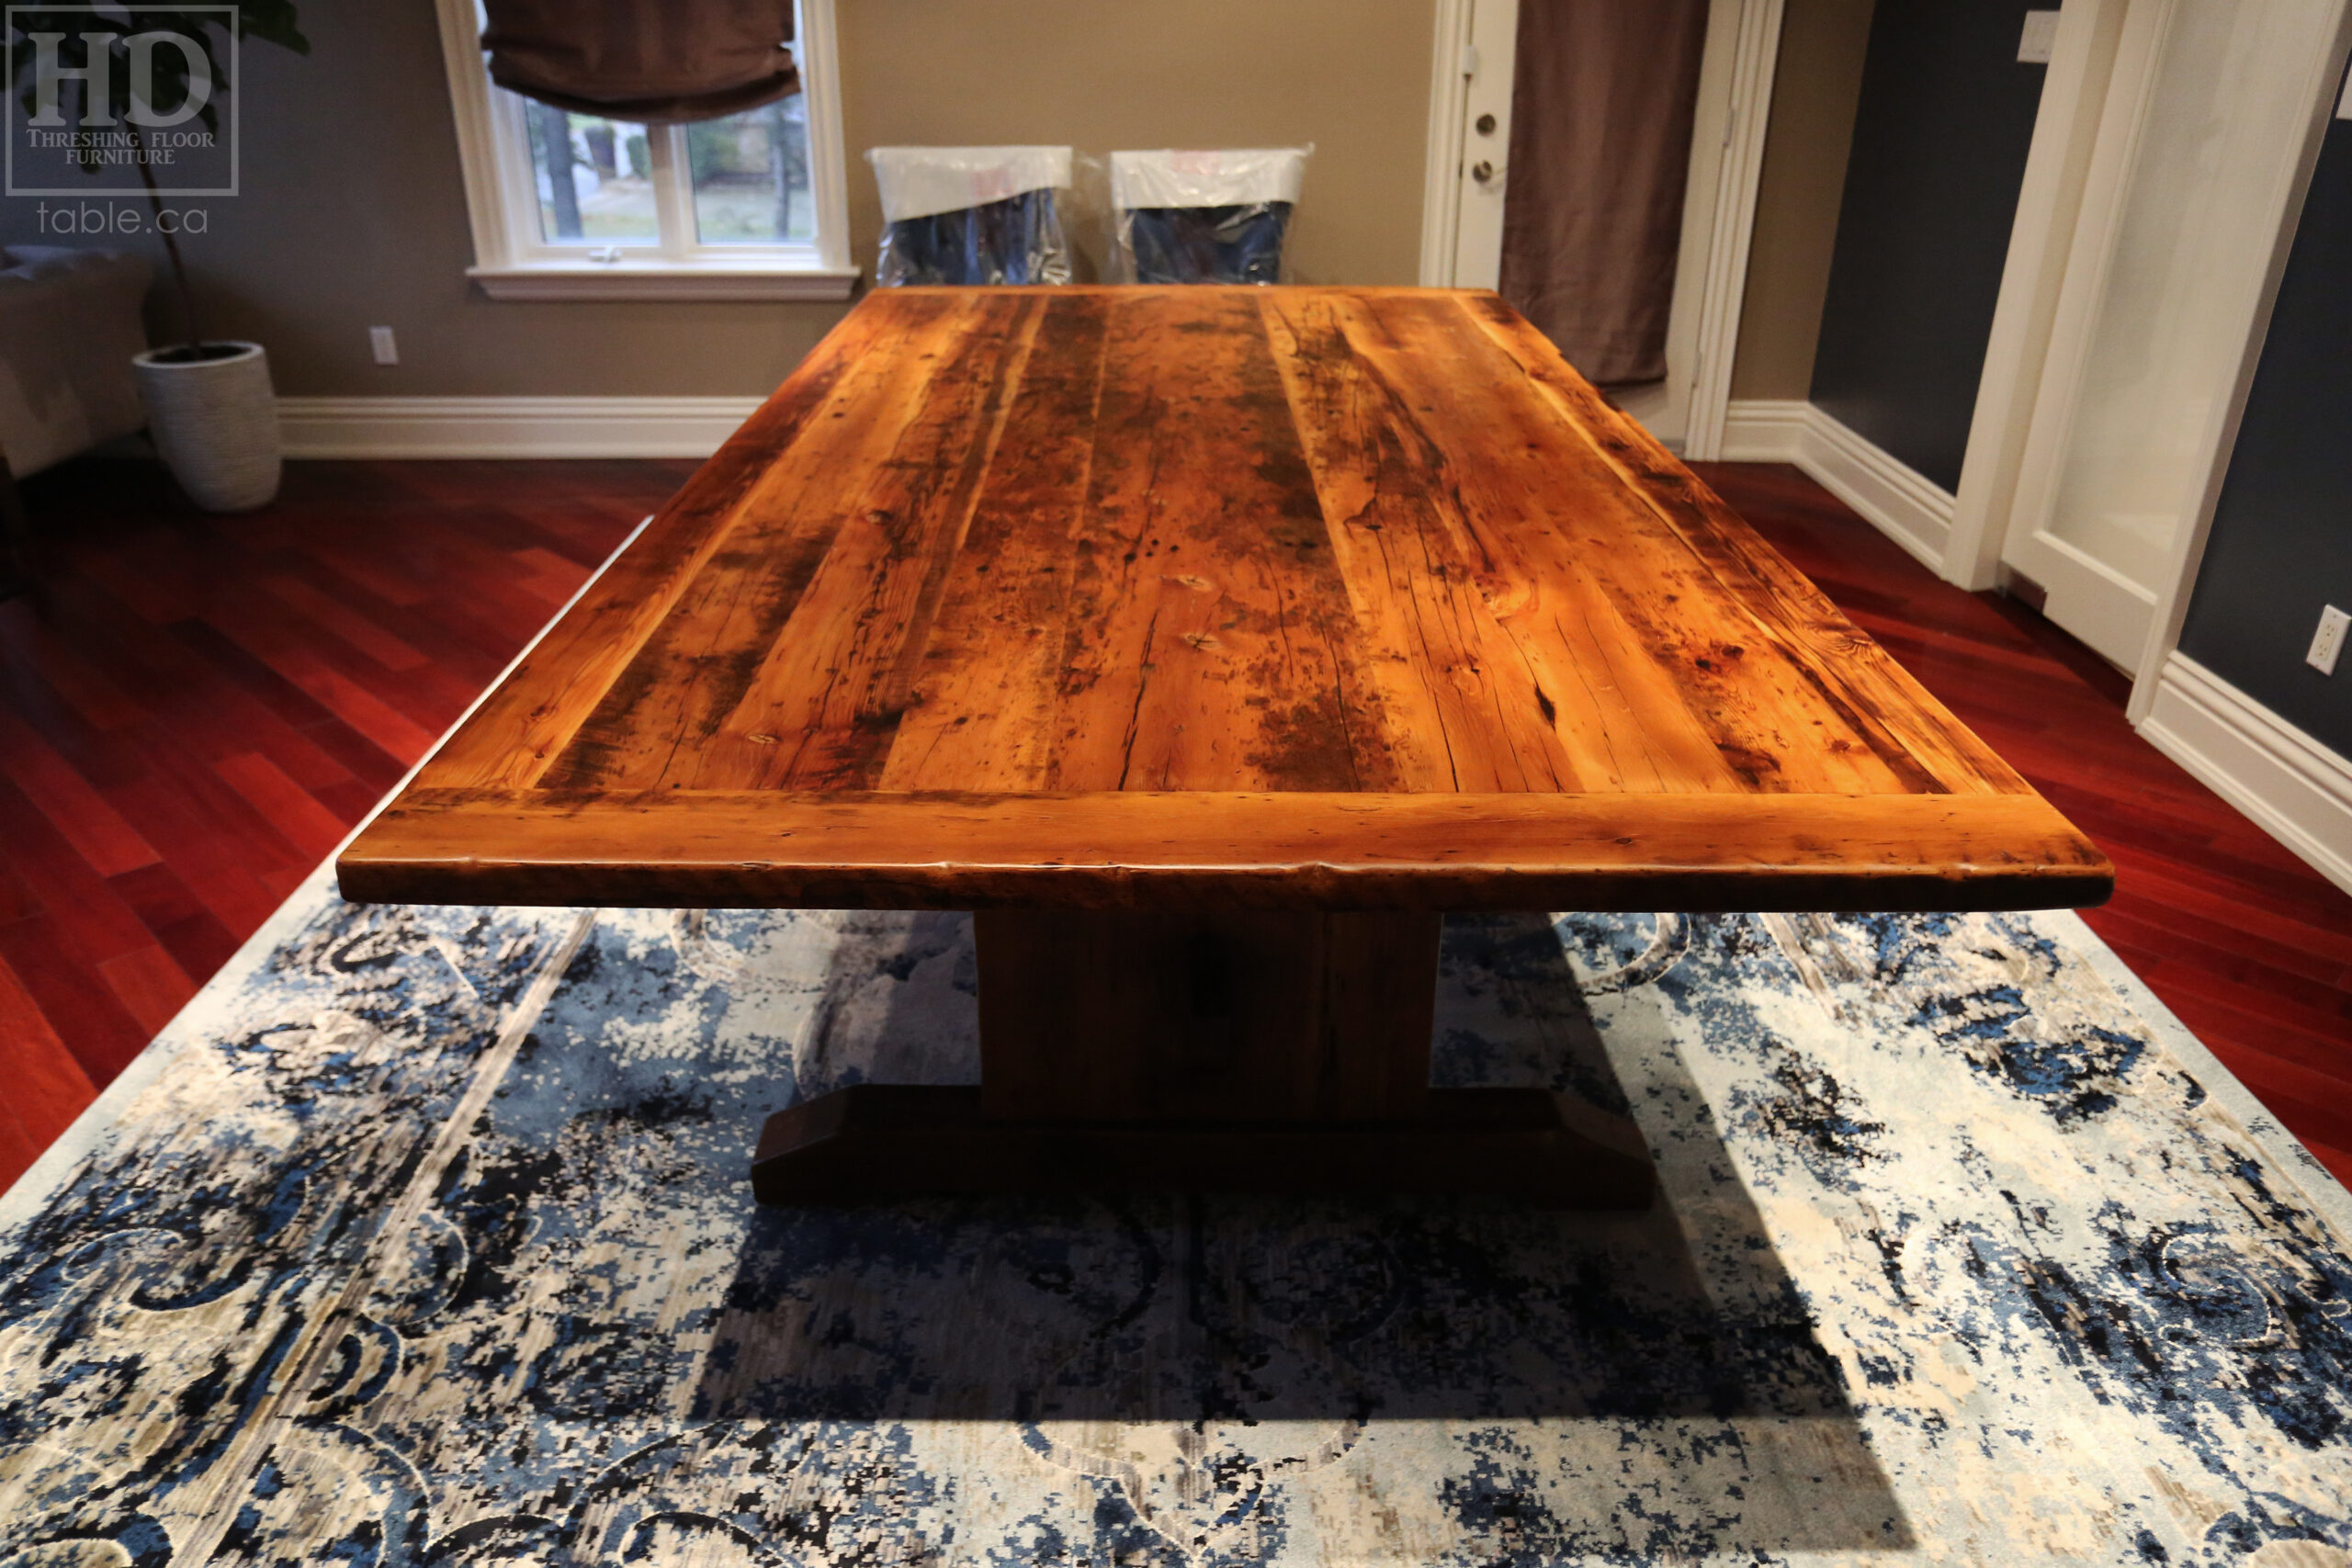 Project details: 10' Ontario Barnwood Table we made for a Woodbridge, Ontario home - 60" wide â€“ Trestle Base â€“ Reclaimed Old Growth Hemlock Threshing Floor Construction / Minimal Sanding out of Original Patina â€“ Original edges & distressing maintained â€“ Premium epoxy + matte polyurethane finish - www.table.ca